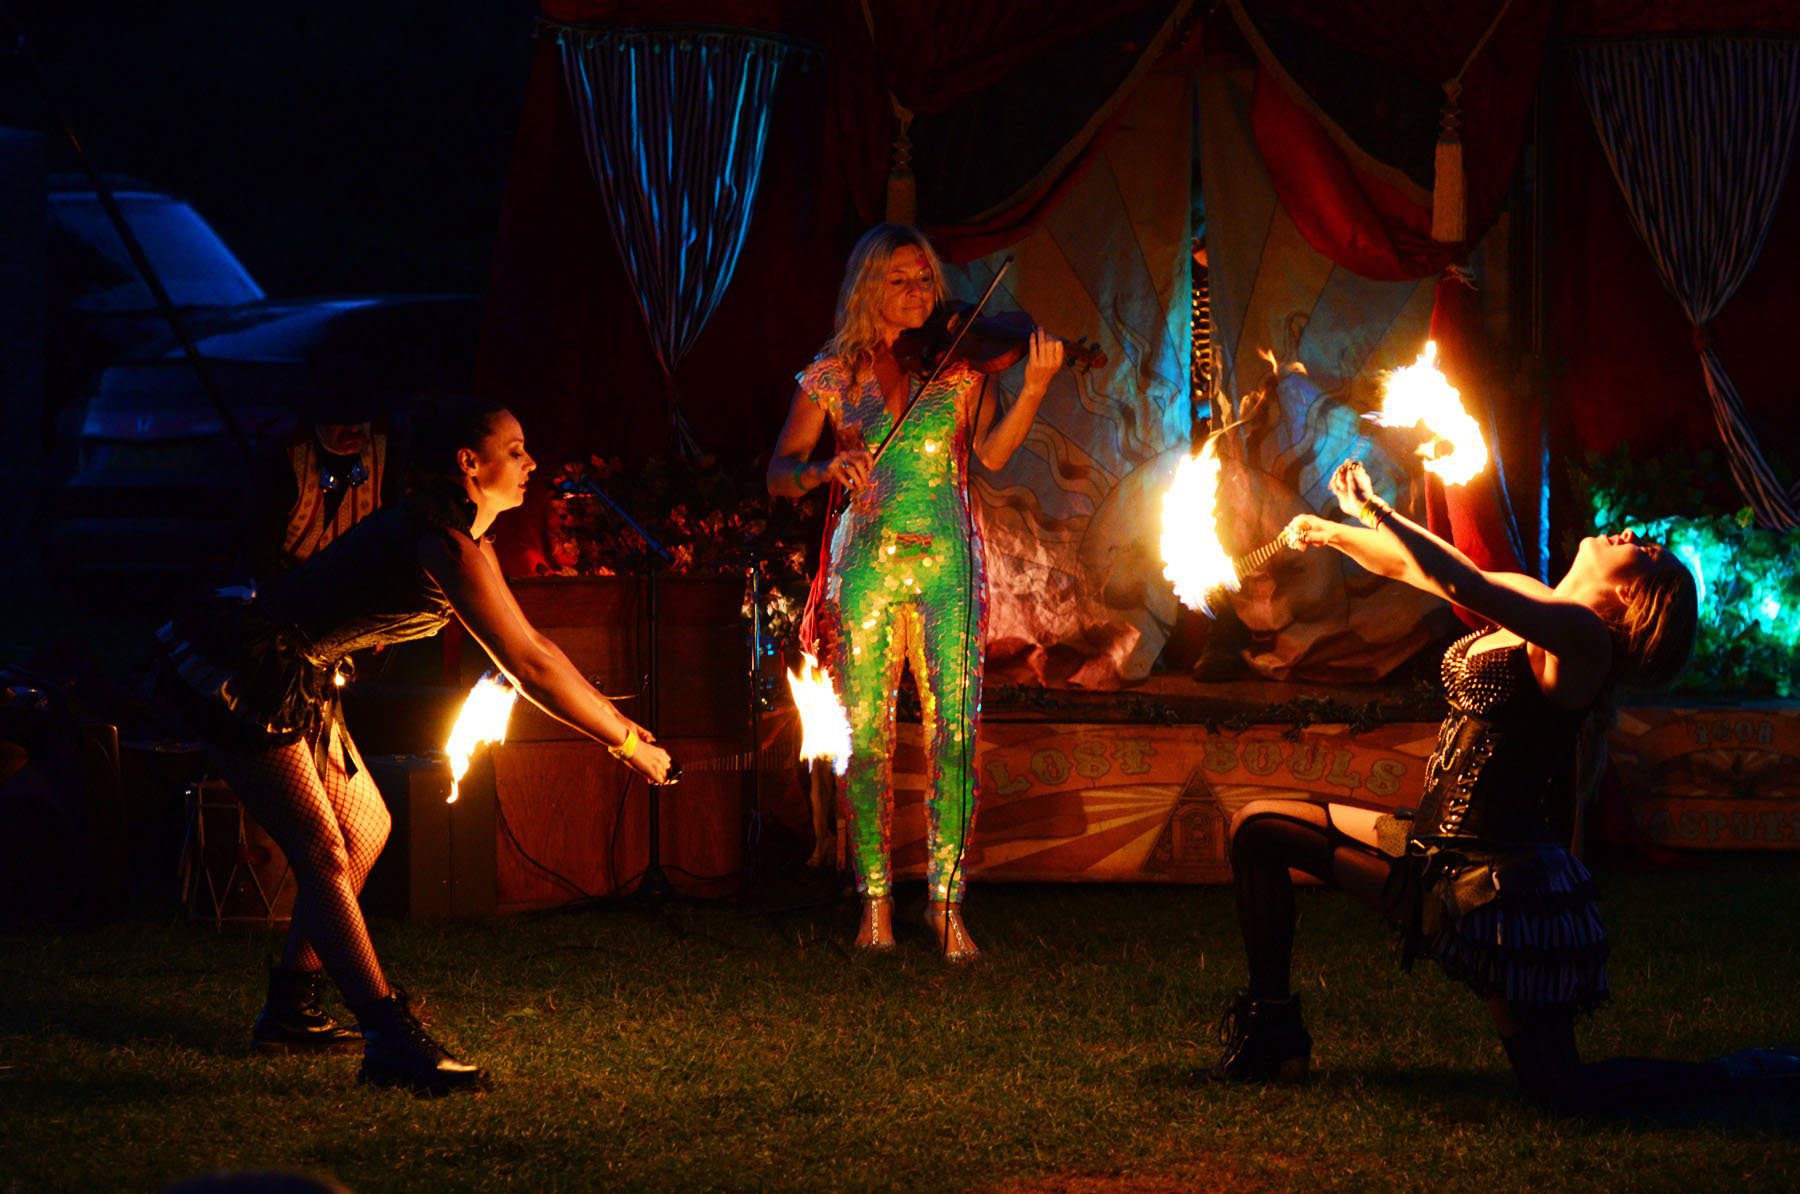 violinist and fire performers